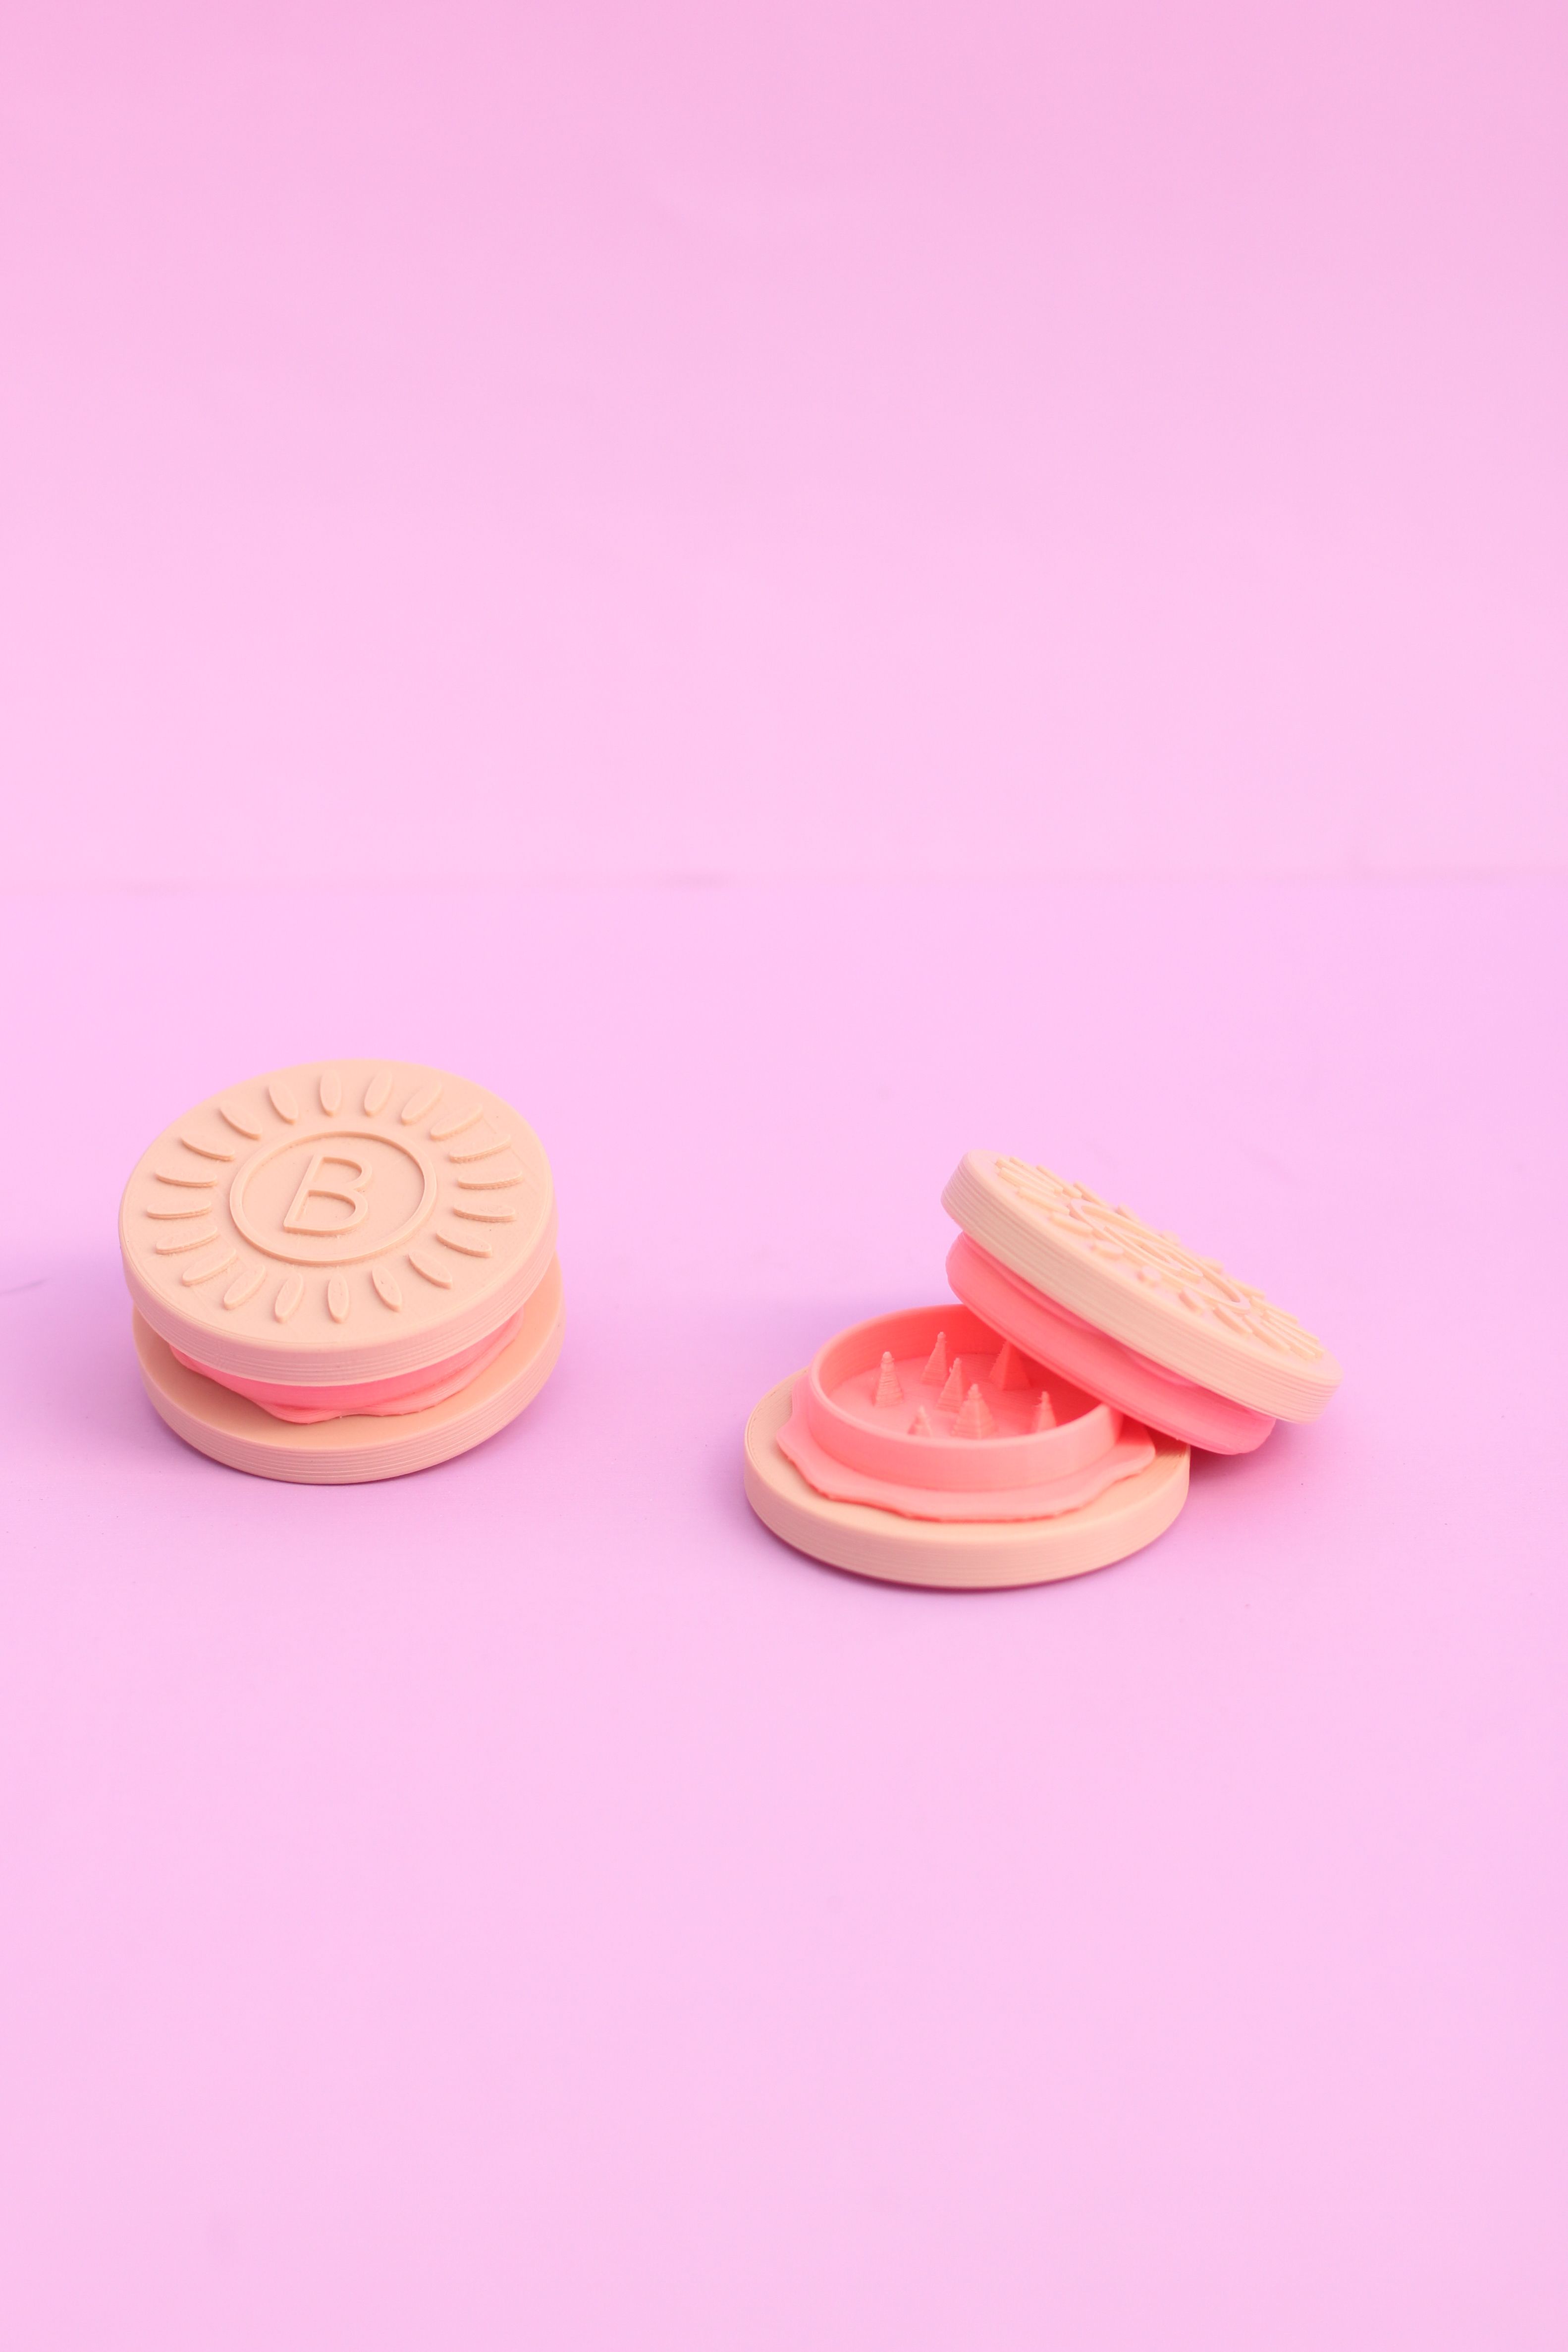 Two halves of a pink and white cookie on a pink background - Oreo